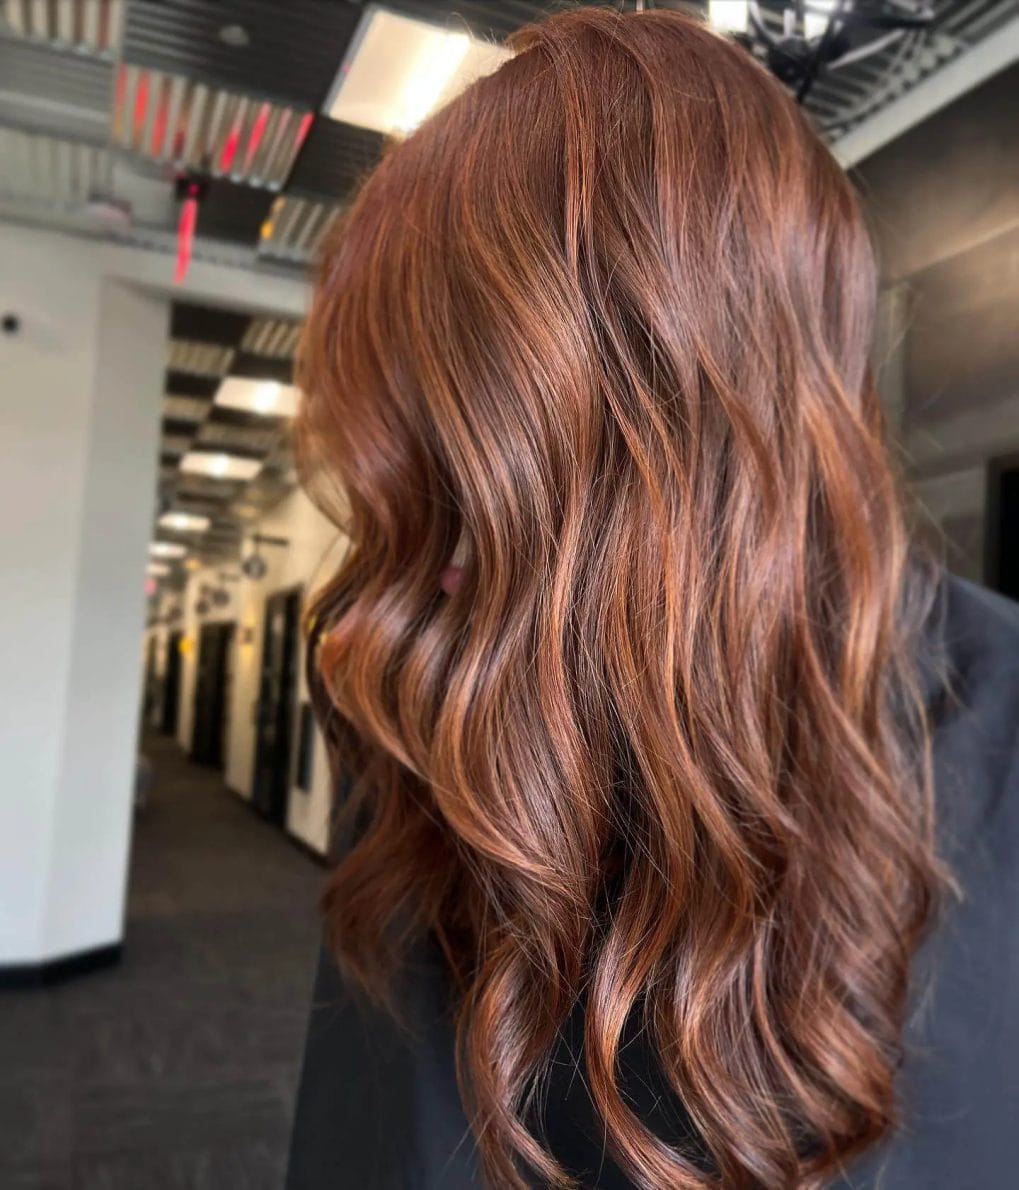 Deep copper tones in flowing layers with soft waves.